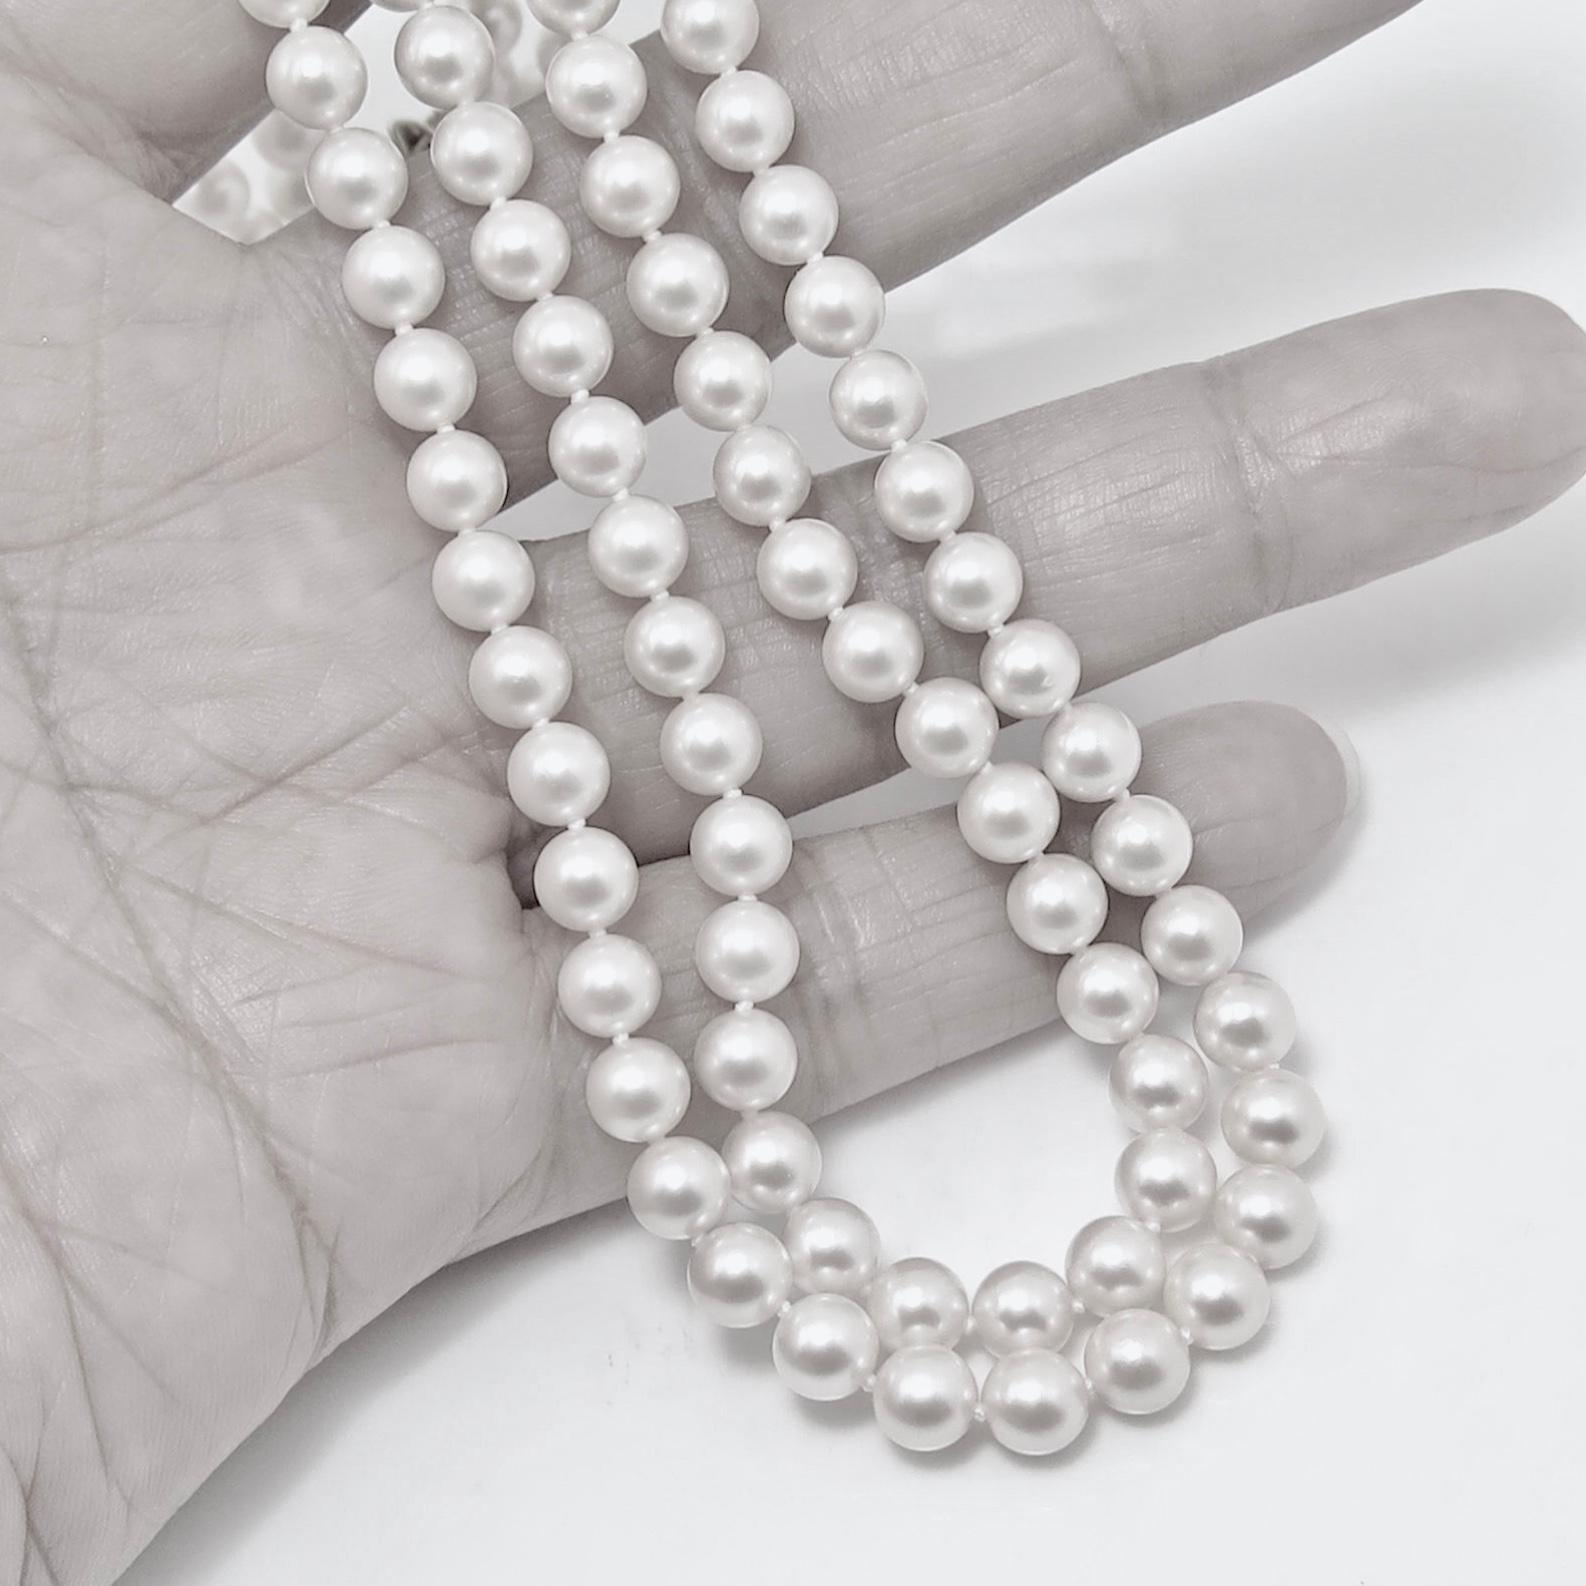 Bead Japanese Akoya Pearl Necklace,  48 Inches